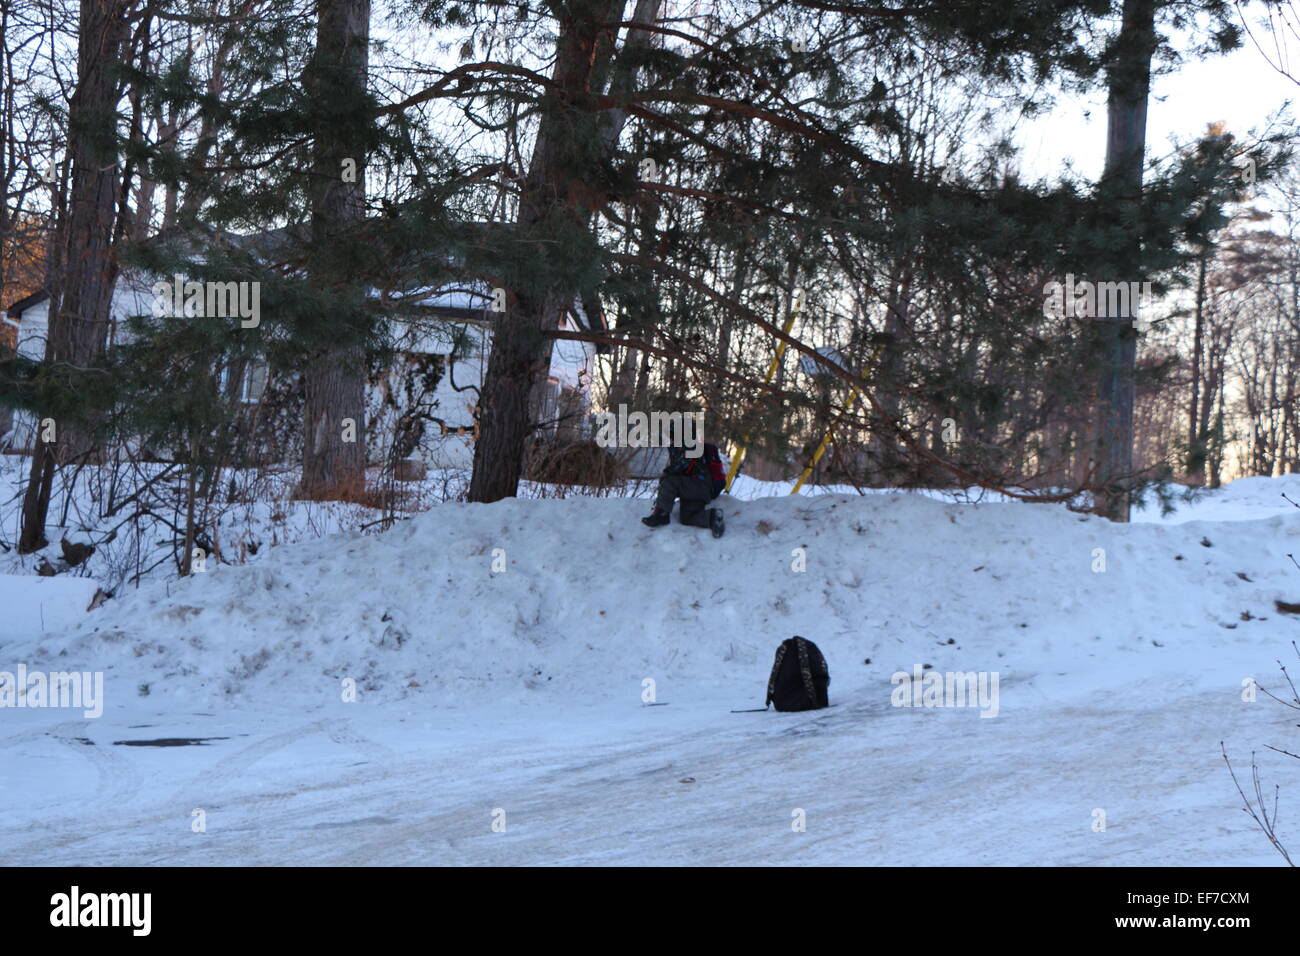 child playing in snow, at the to of hill Stock Photo